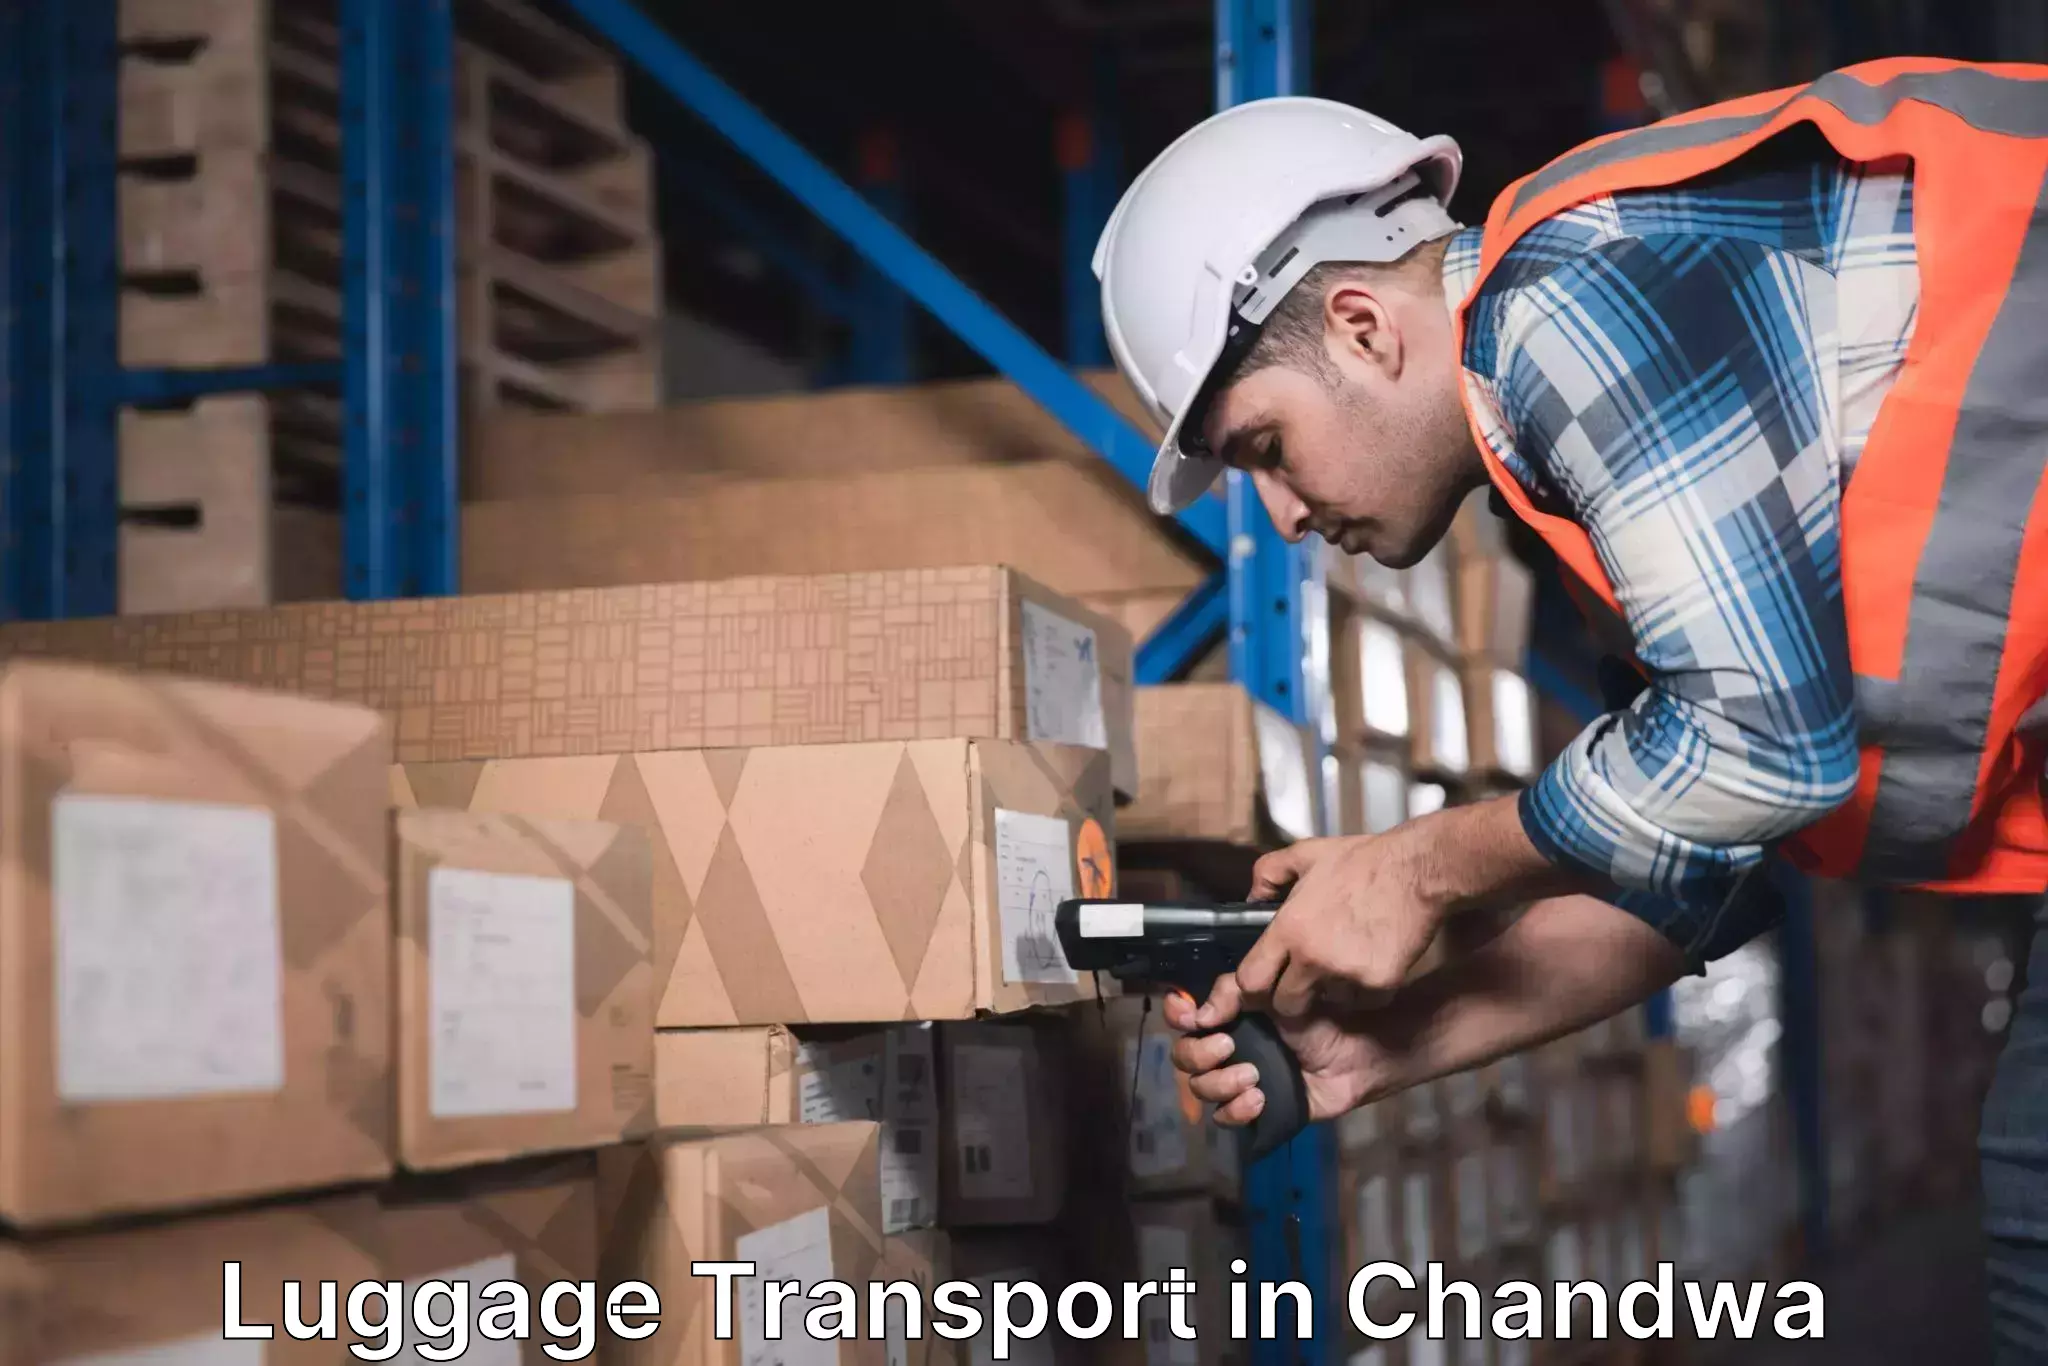 Luggage transport company in Chandwa